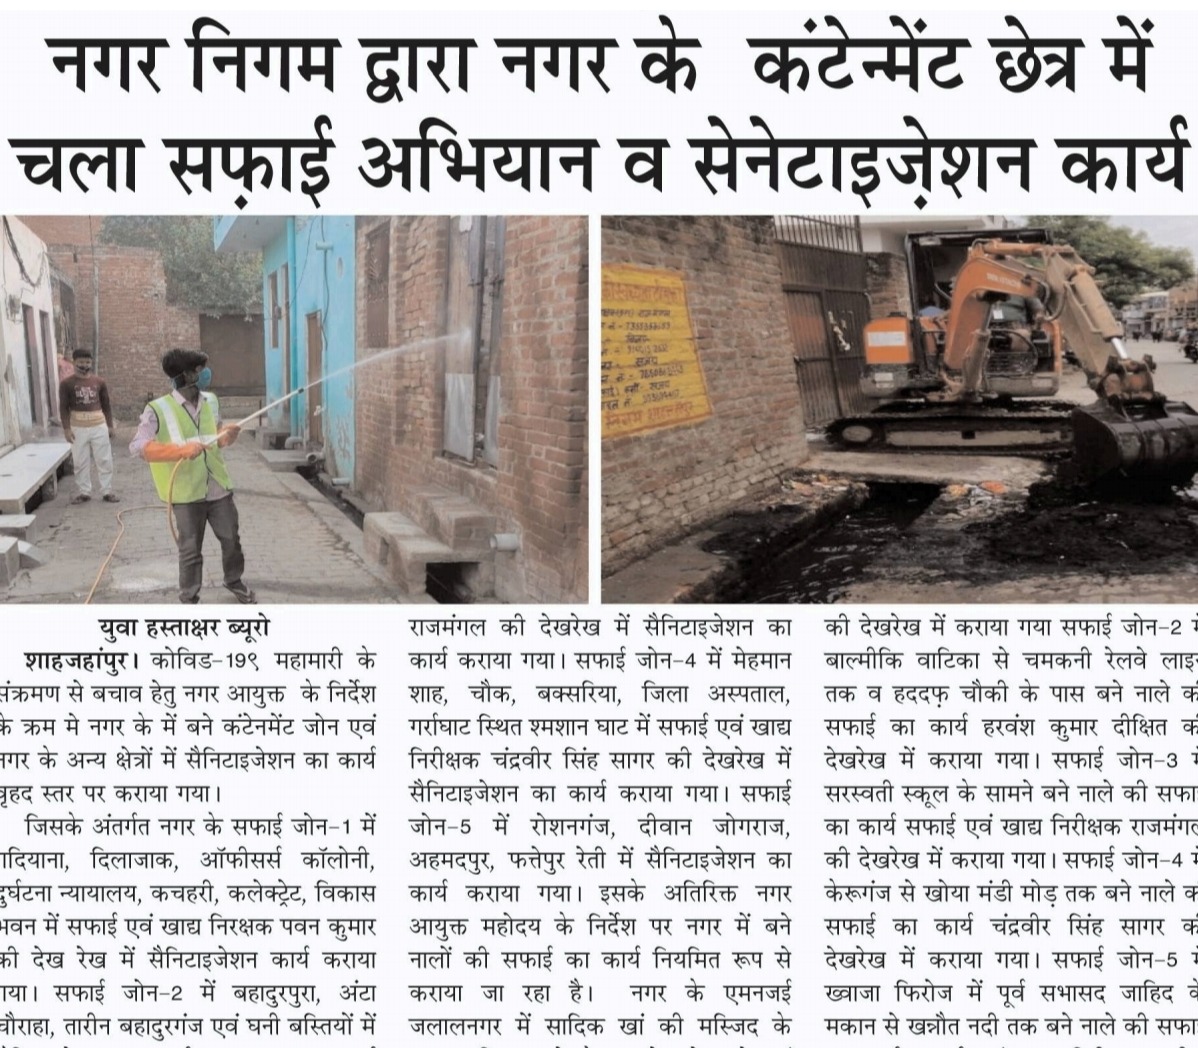 Cleanliness and sanitization drive carried out by the Municipal Corporation in the containment zones of the city.